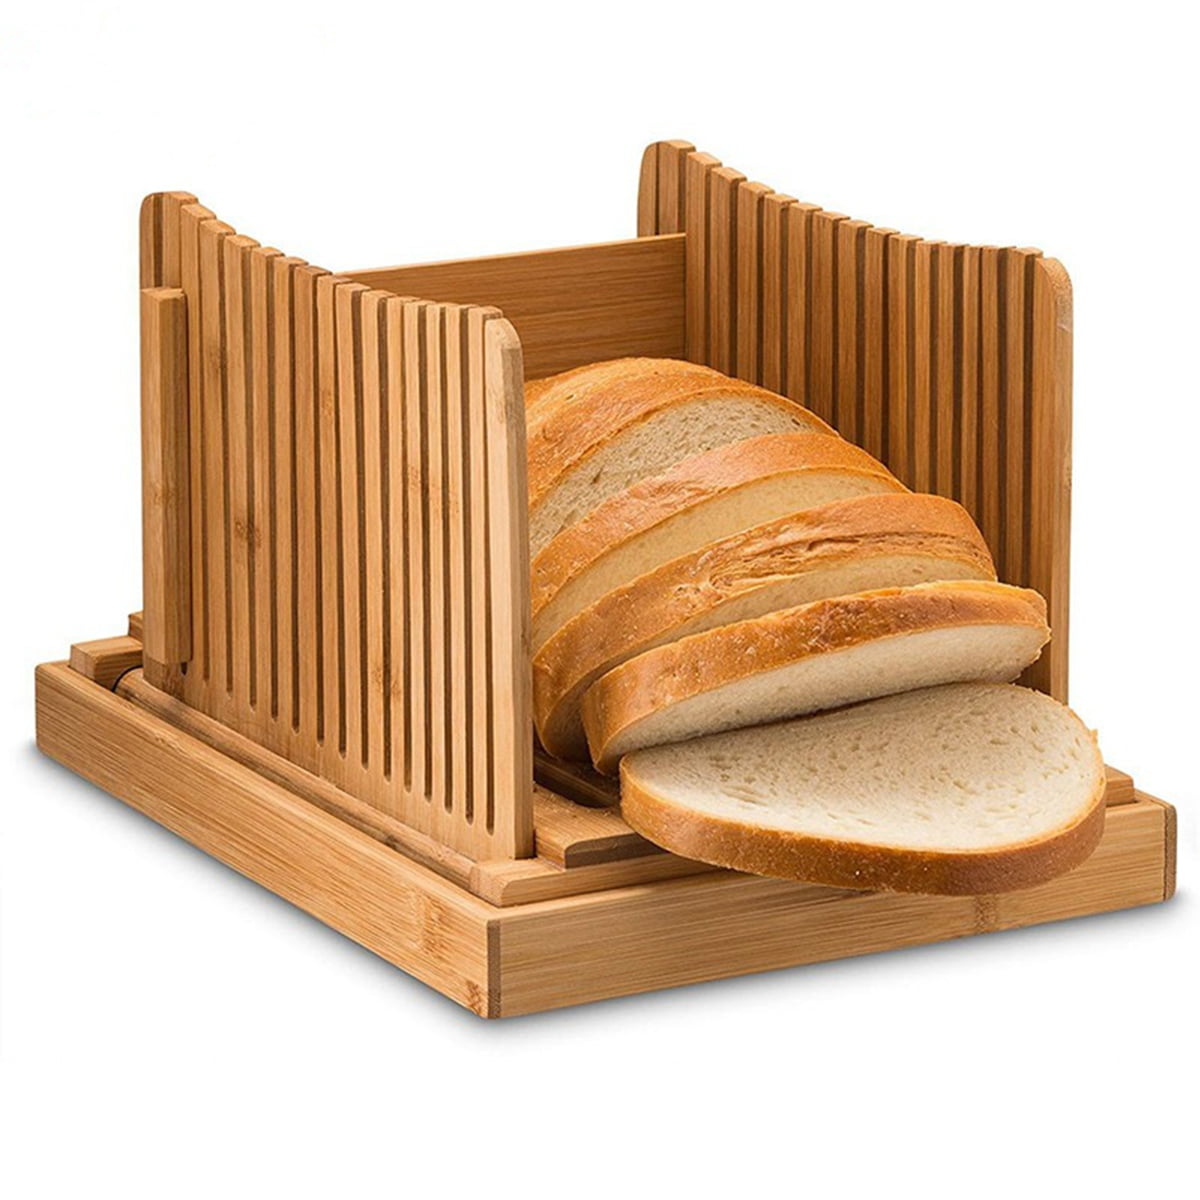  Bread Slicer with Crumb Tray Premium Bread Slicer for Sourdough  Bread Compact Foldable Adjustable Thickness Manual Slicing Bamboo Plug in Bread  Slicing Guide for Homemade Bread Wooden Color: Home & Kitchen